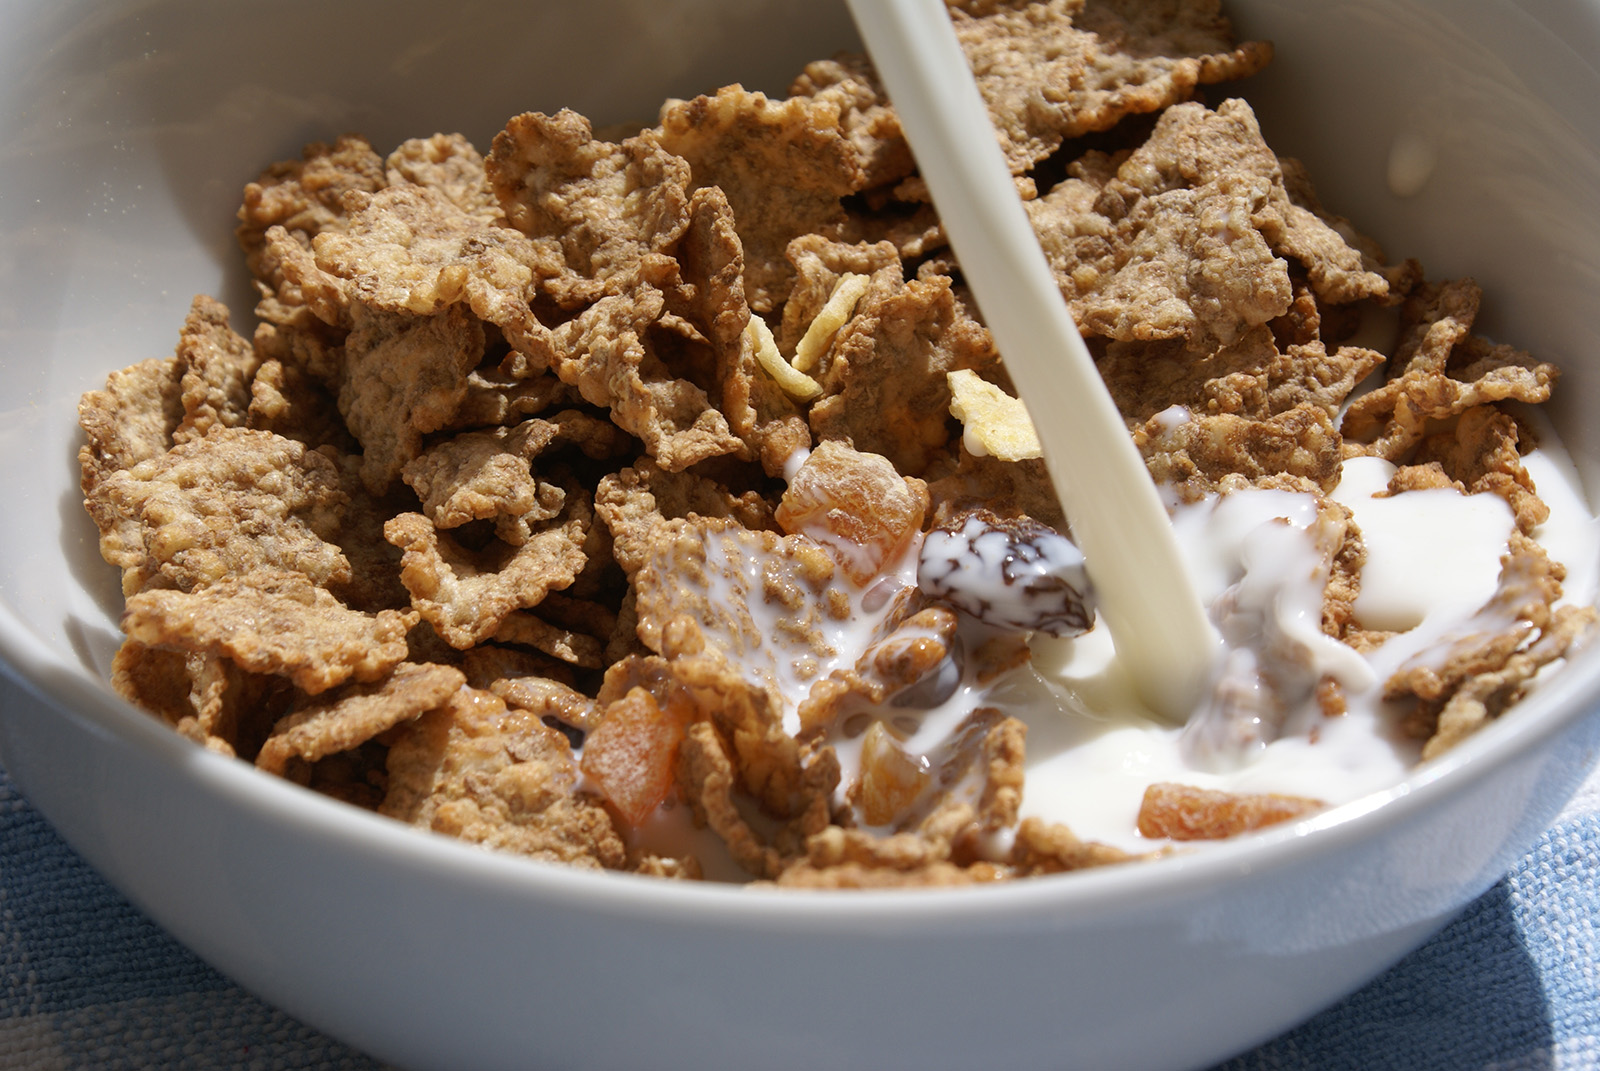 Fruit-and-fibre-cereal-the-trent.jpg